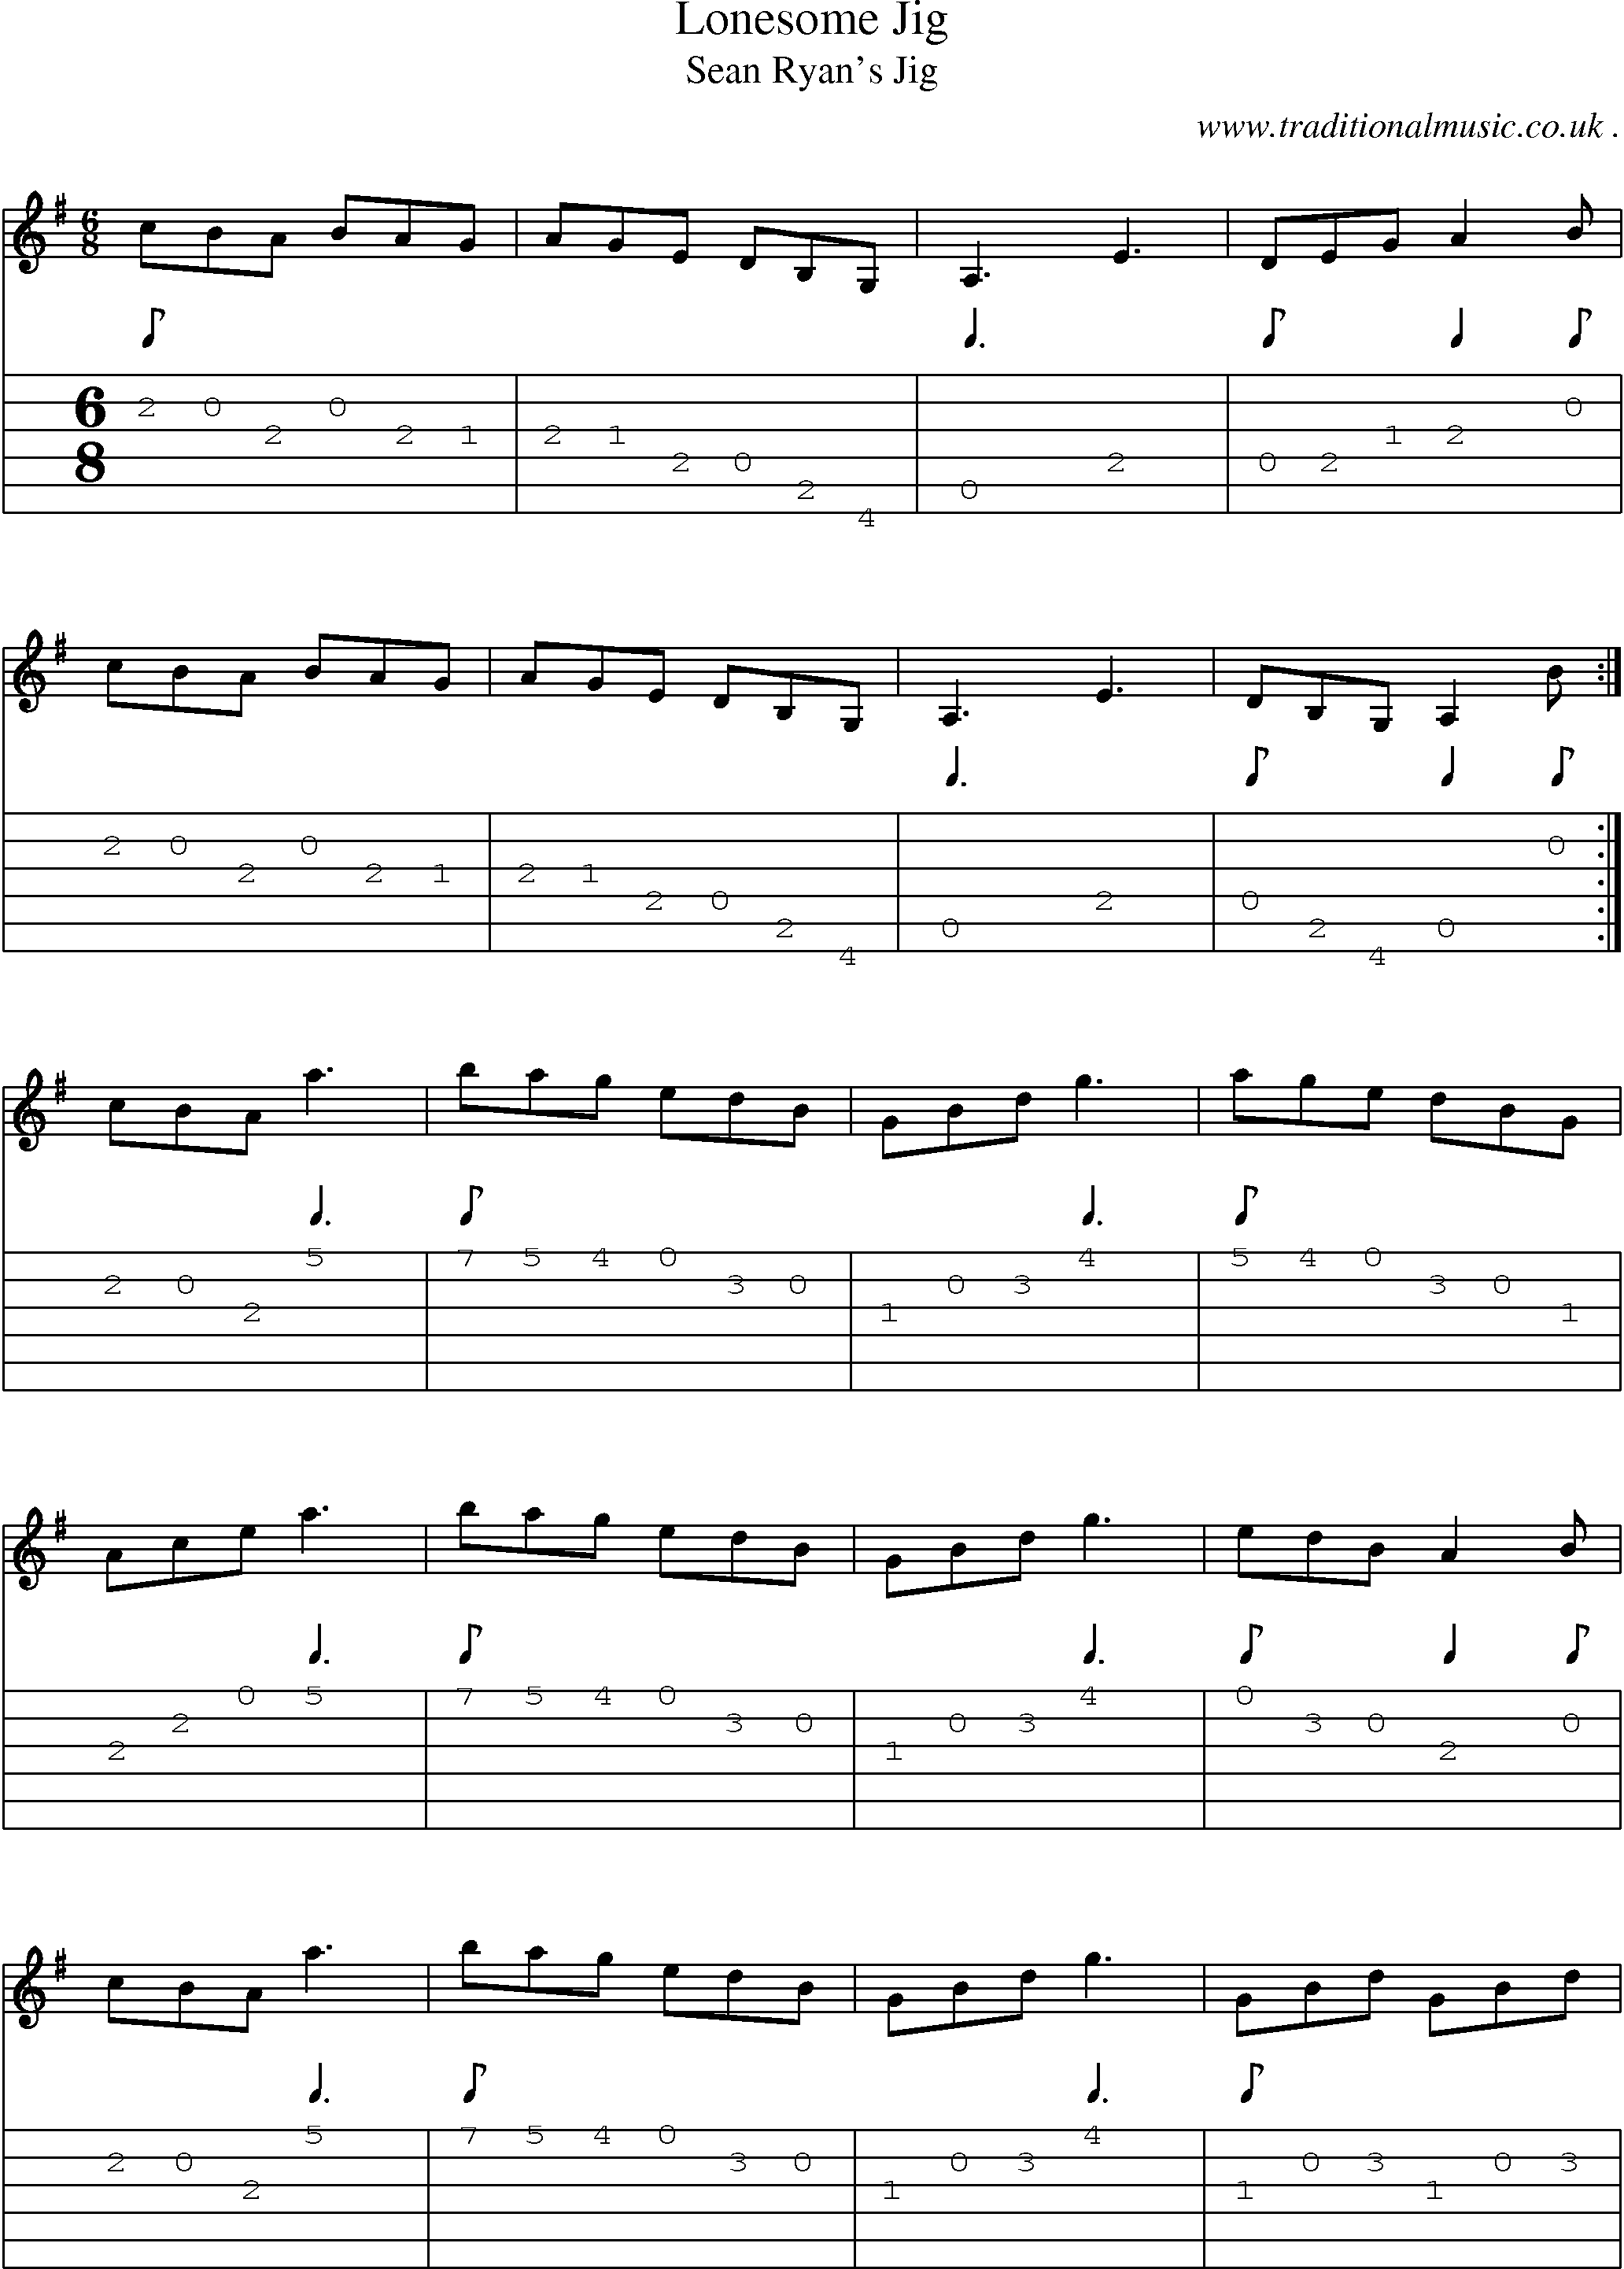 Sheet-Music and Guitar Tabs for Lonesome Jig